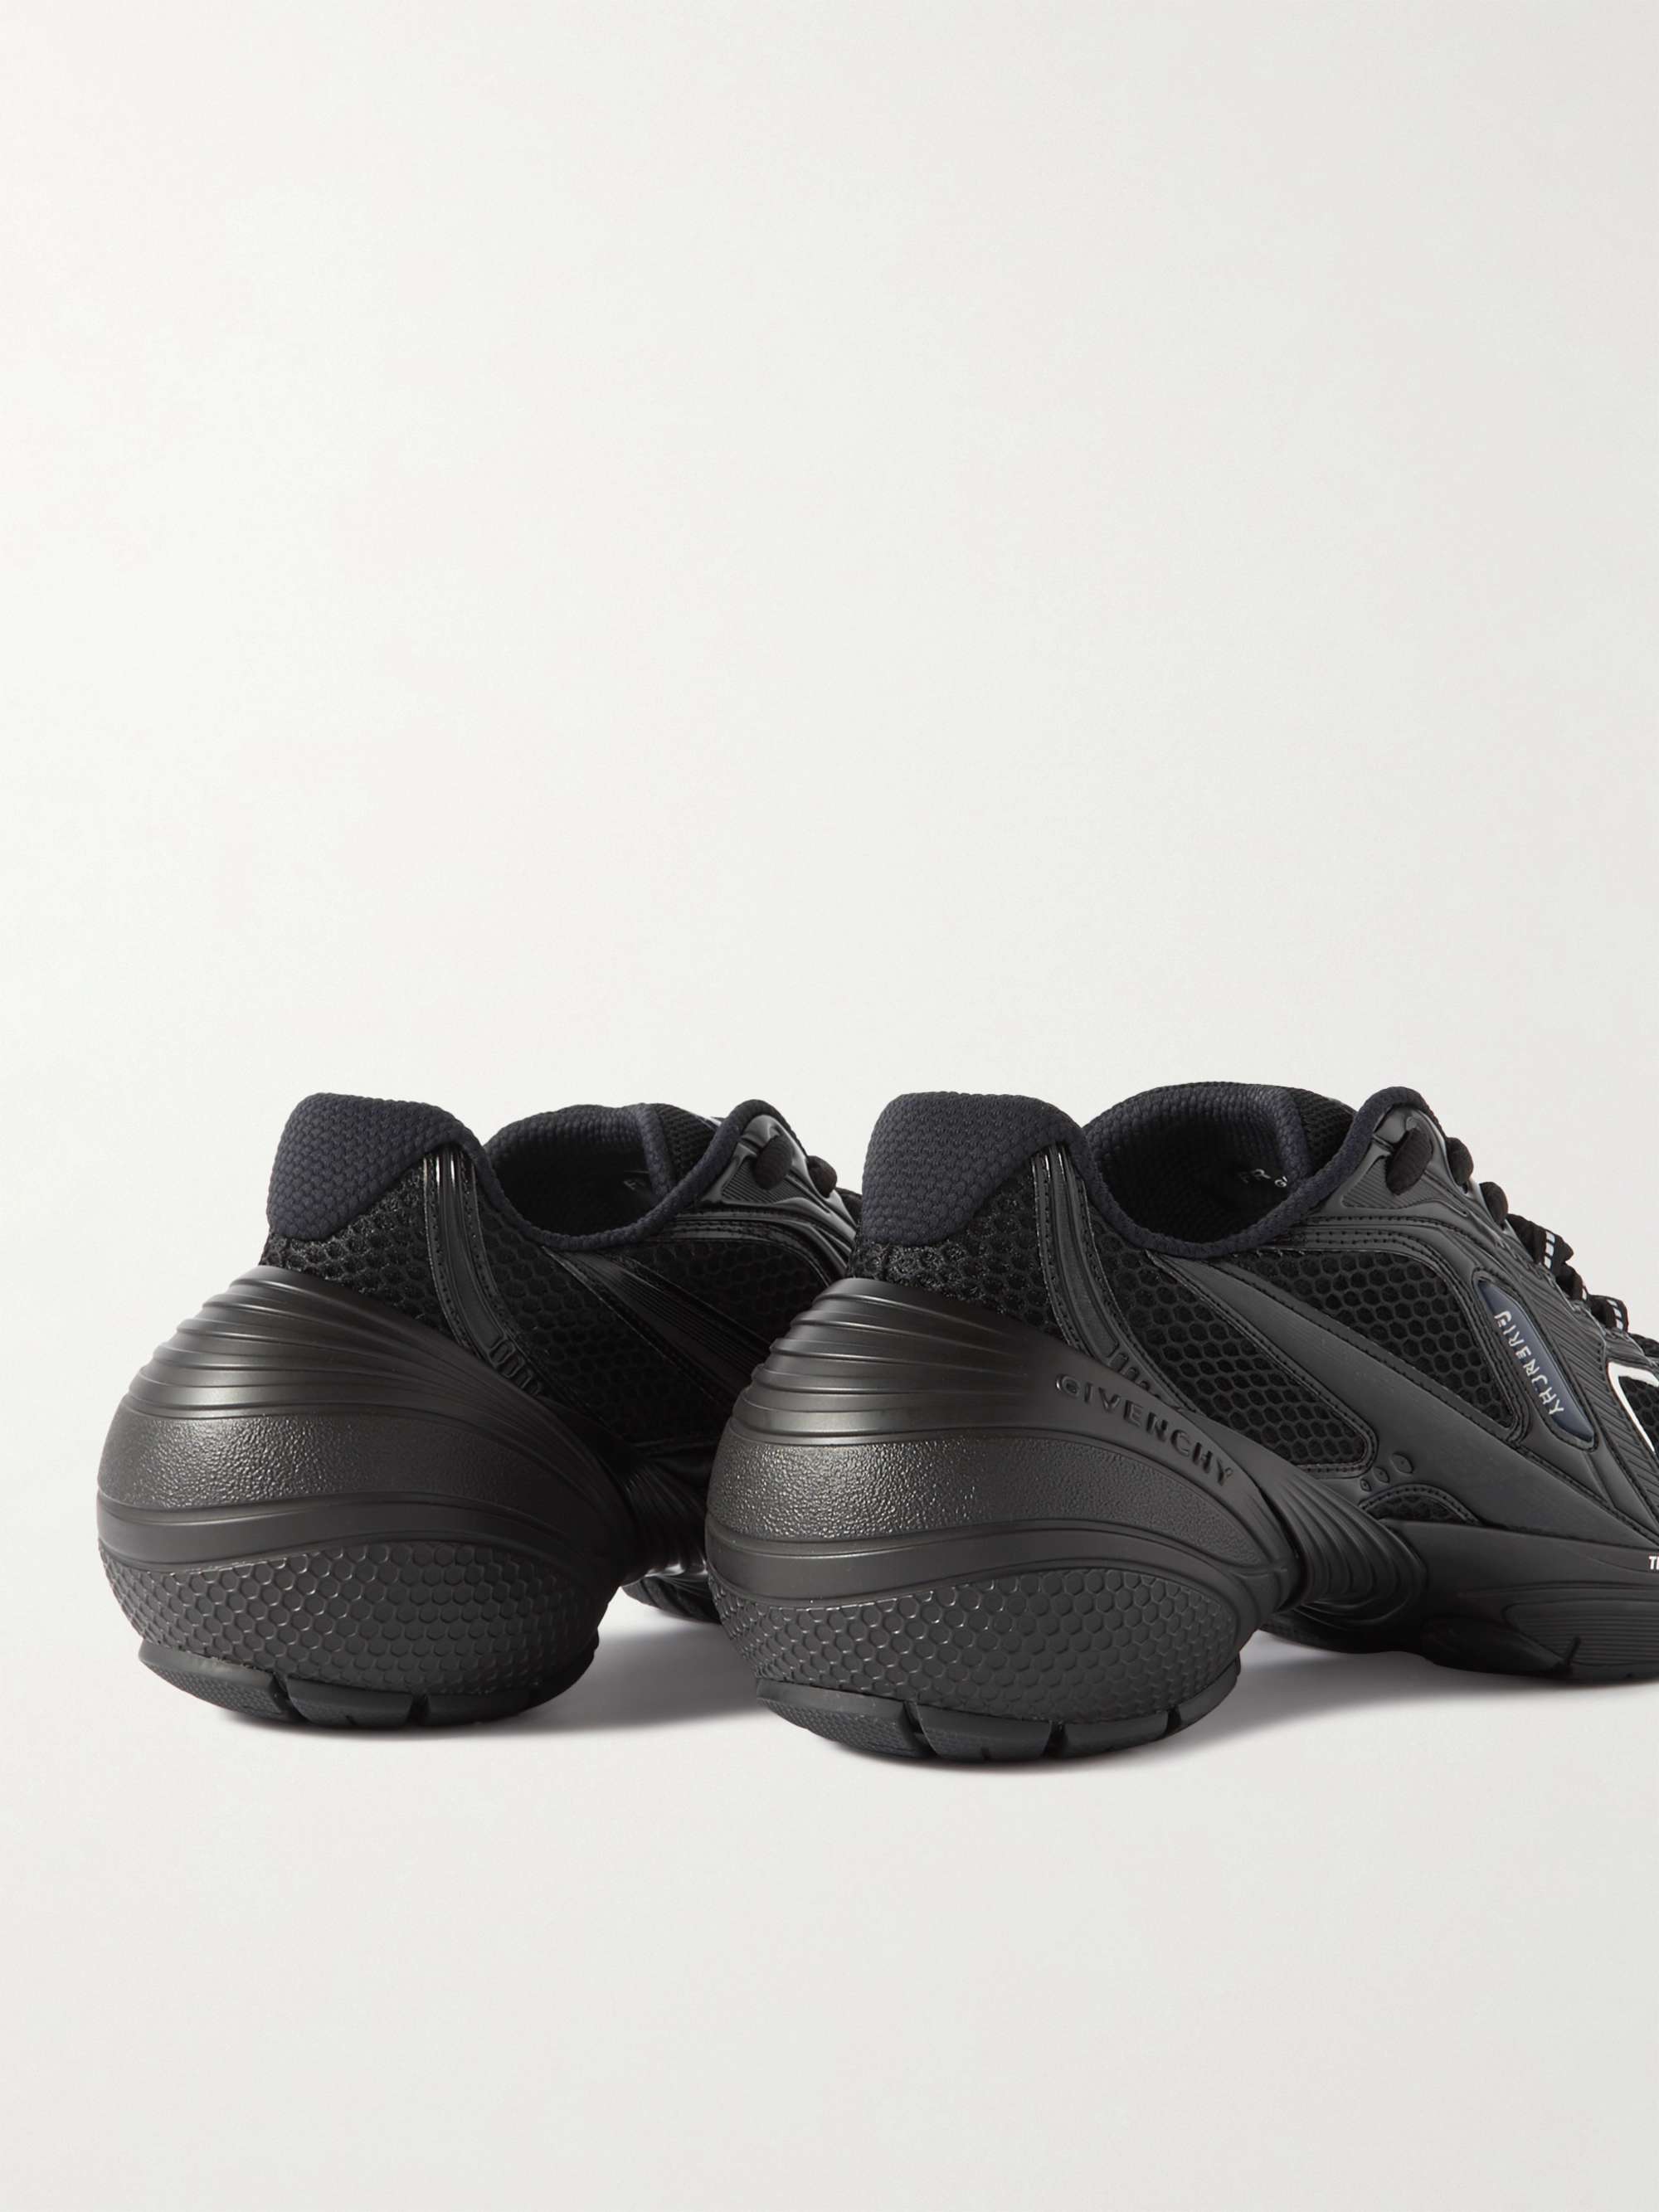 GIVENCHY TK-MX Mesh, Rubber and Faux Leather Sneakers